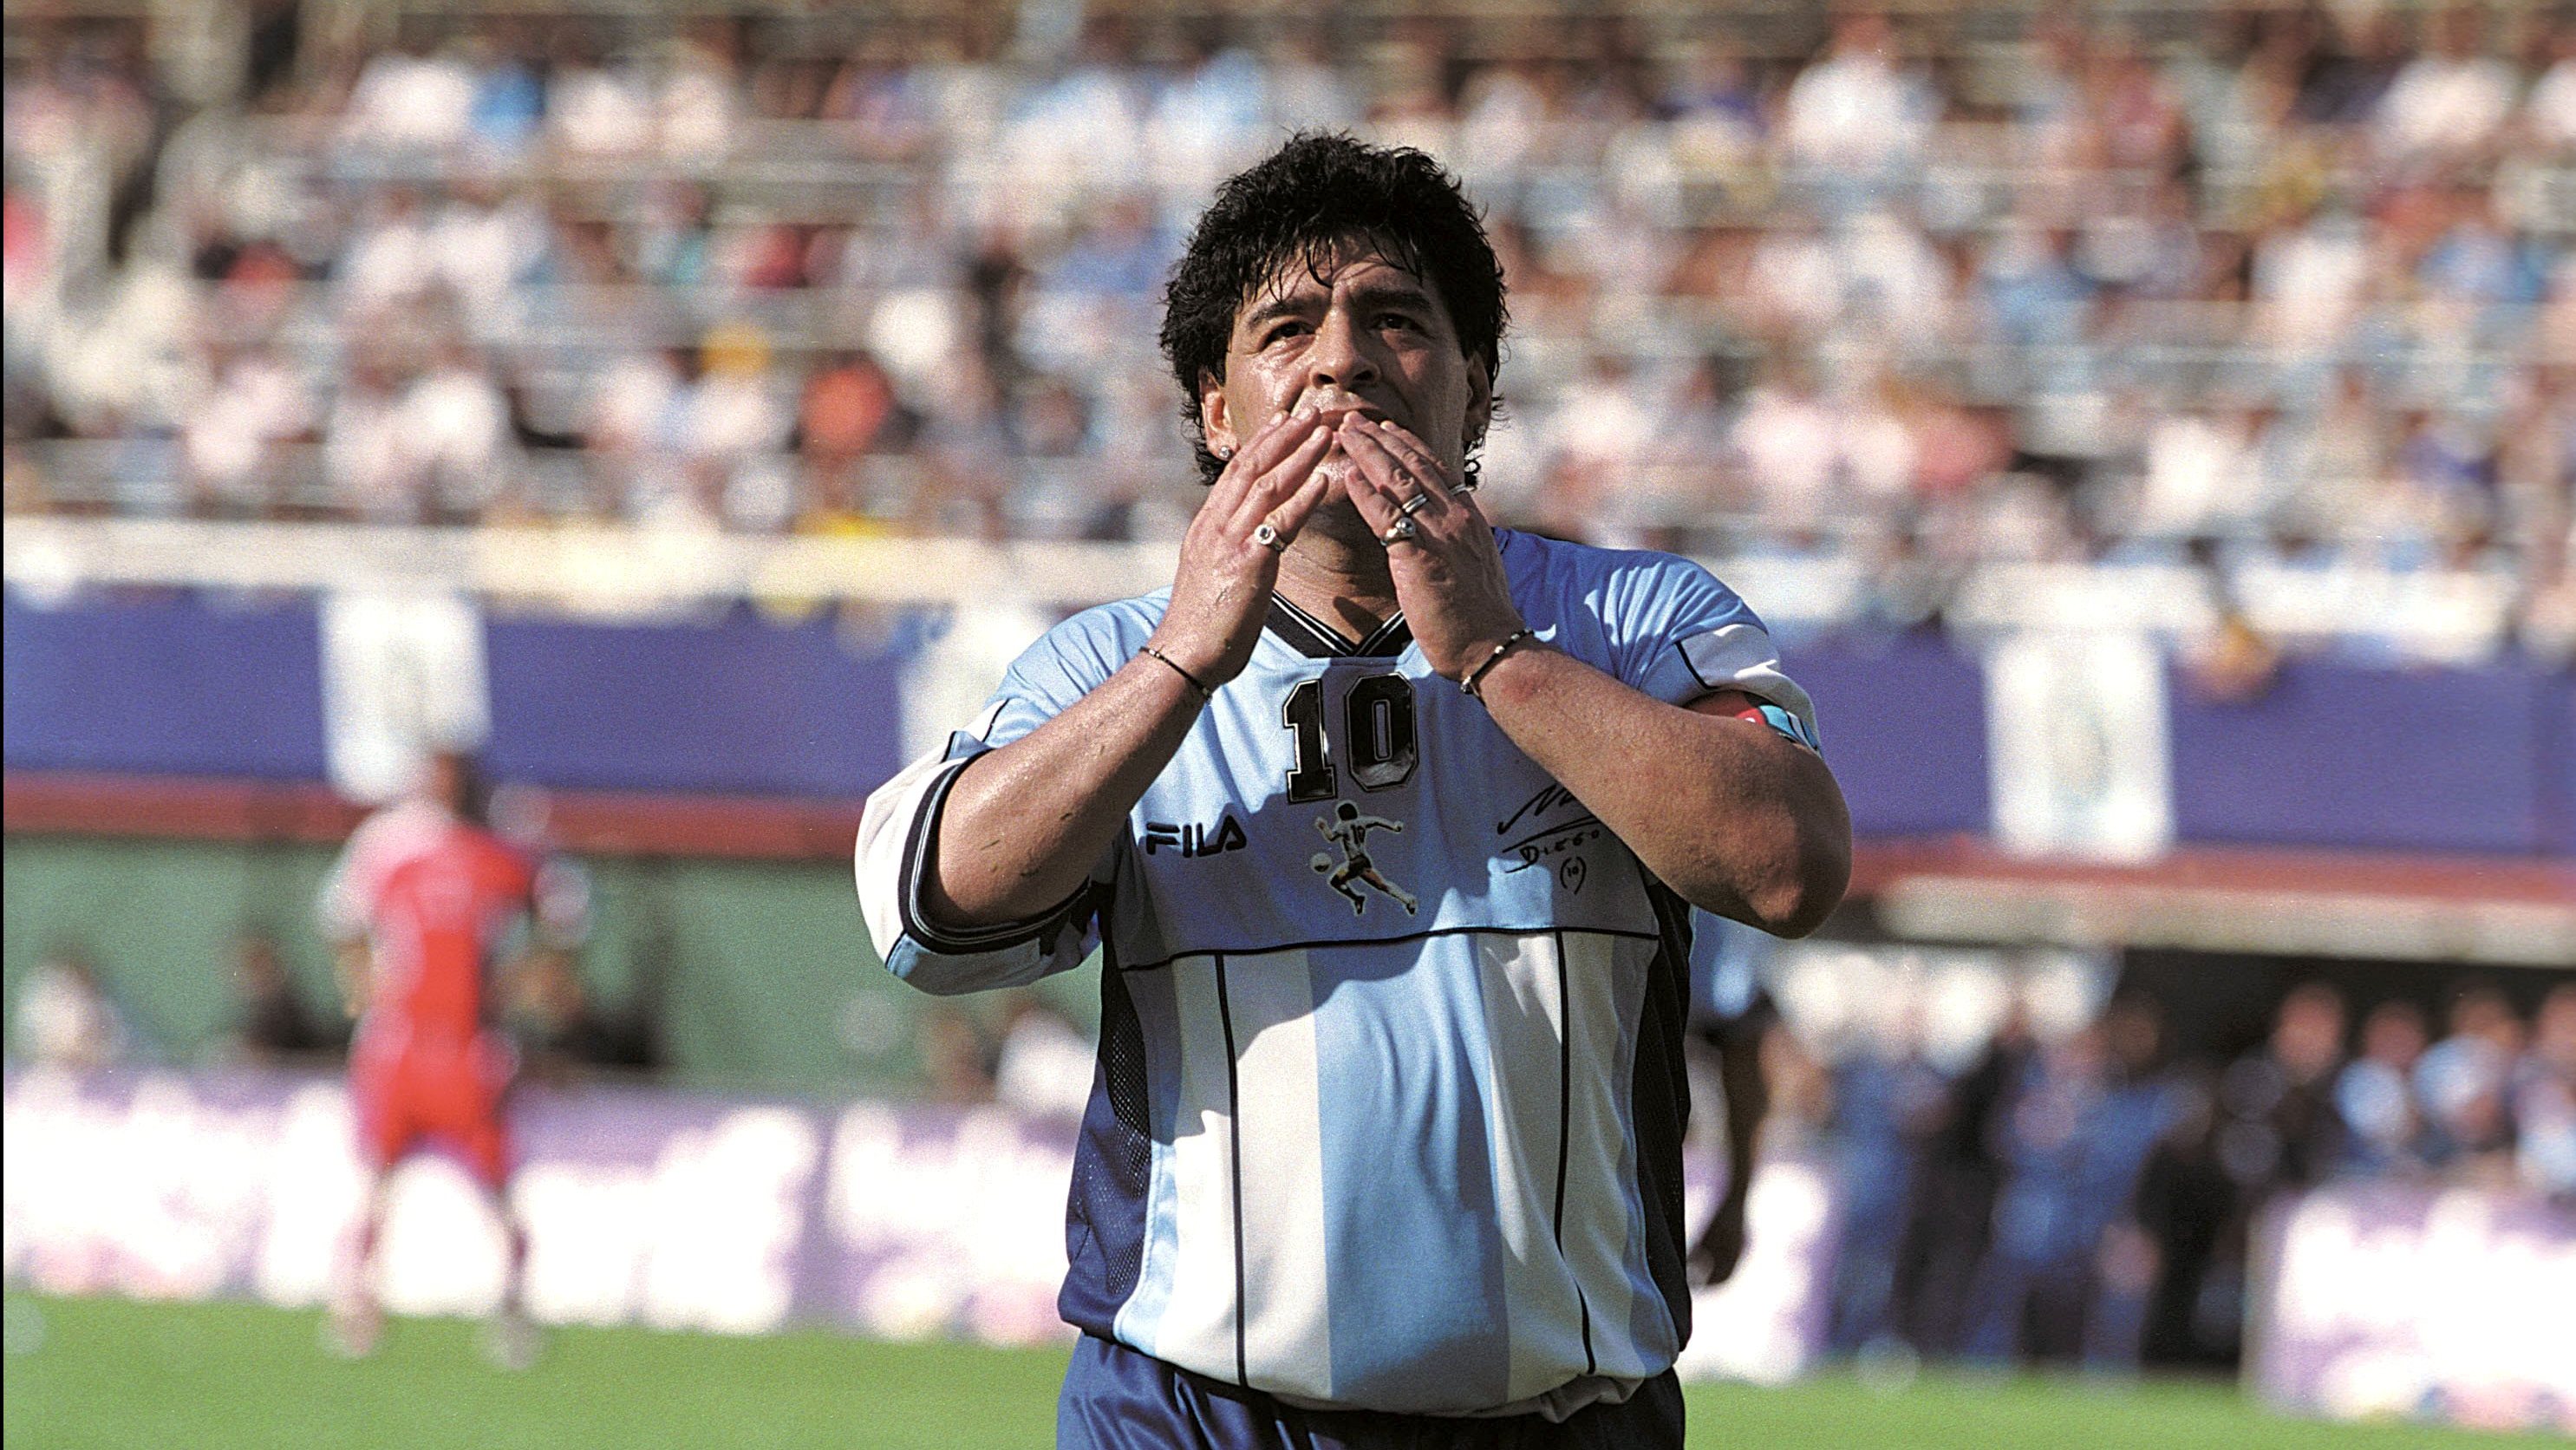 Diego Maradona says good bye to soccer in Buenos Aires, Argentina on November 01, 2001.